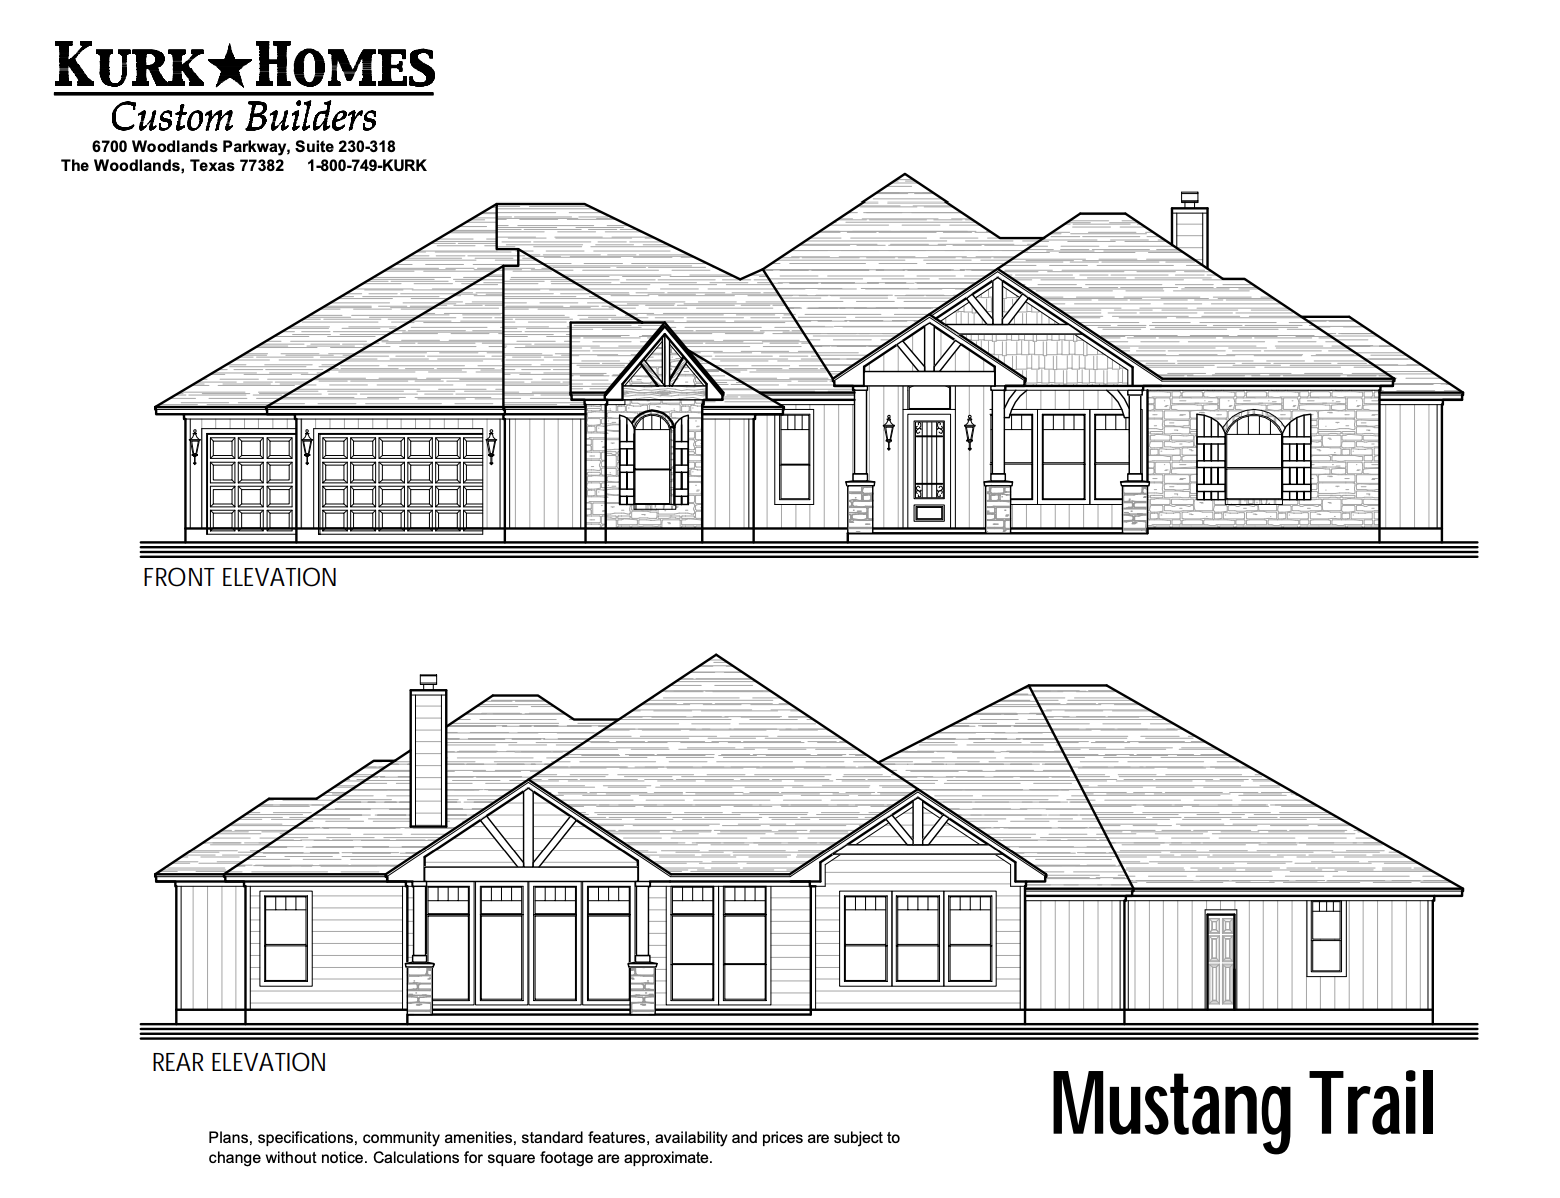 The Mustang Trail - Front Elevation